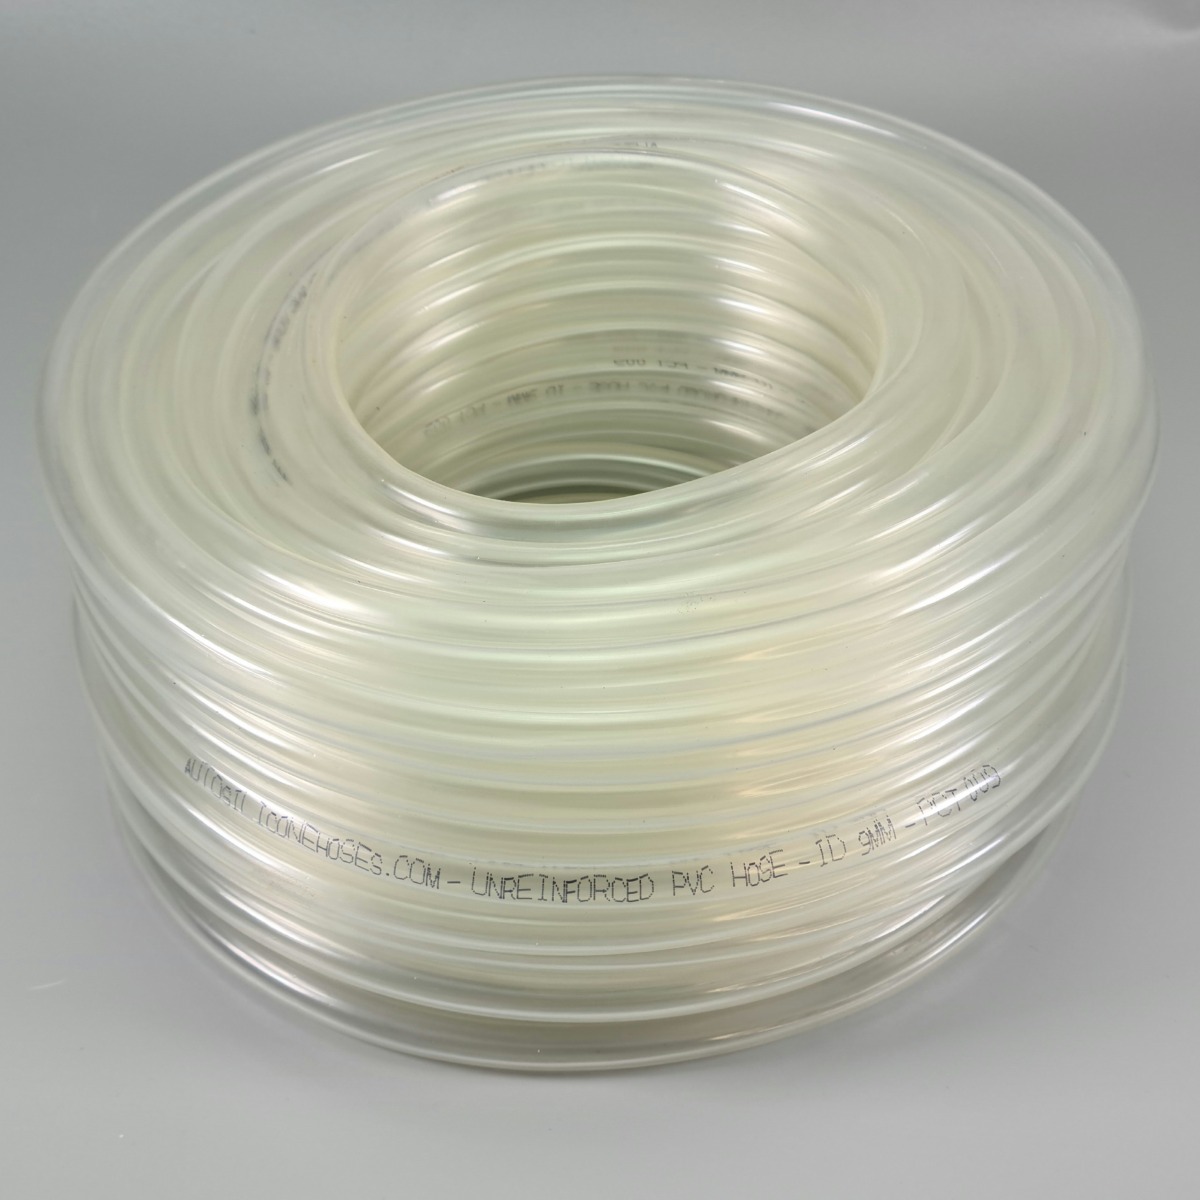 Soft Clear Non-Absorbing PVC Tubing for Air and Water Outer Diameter 11/16-10 ft Inner Diameter 1/2 